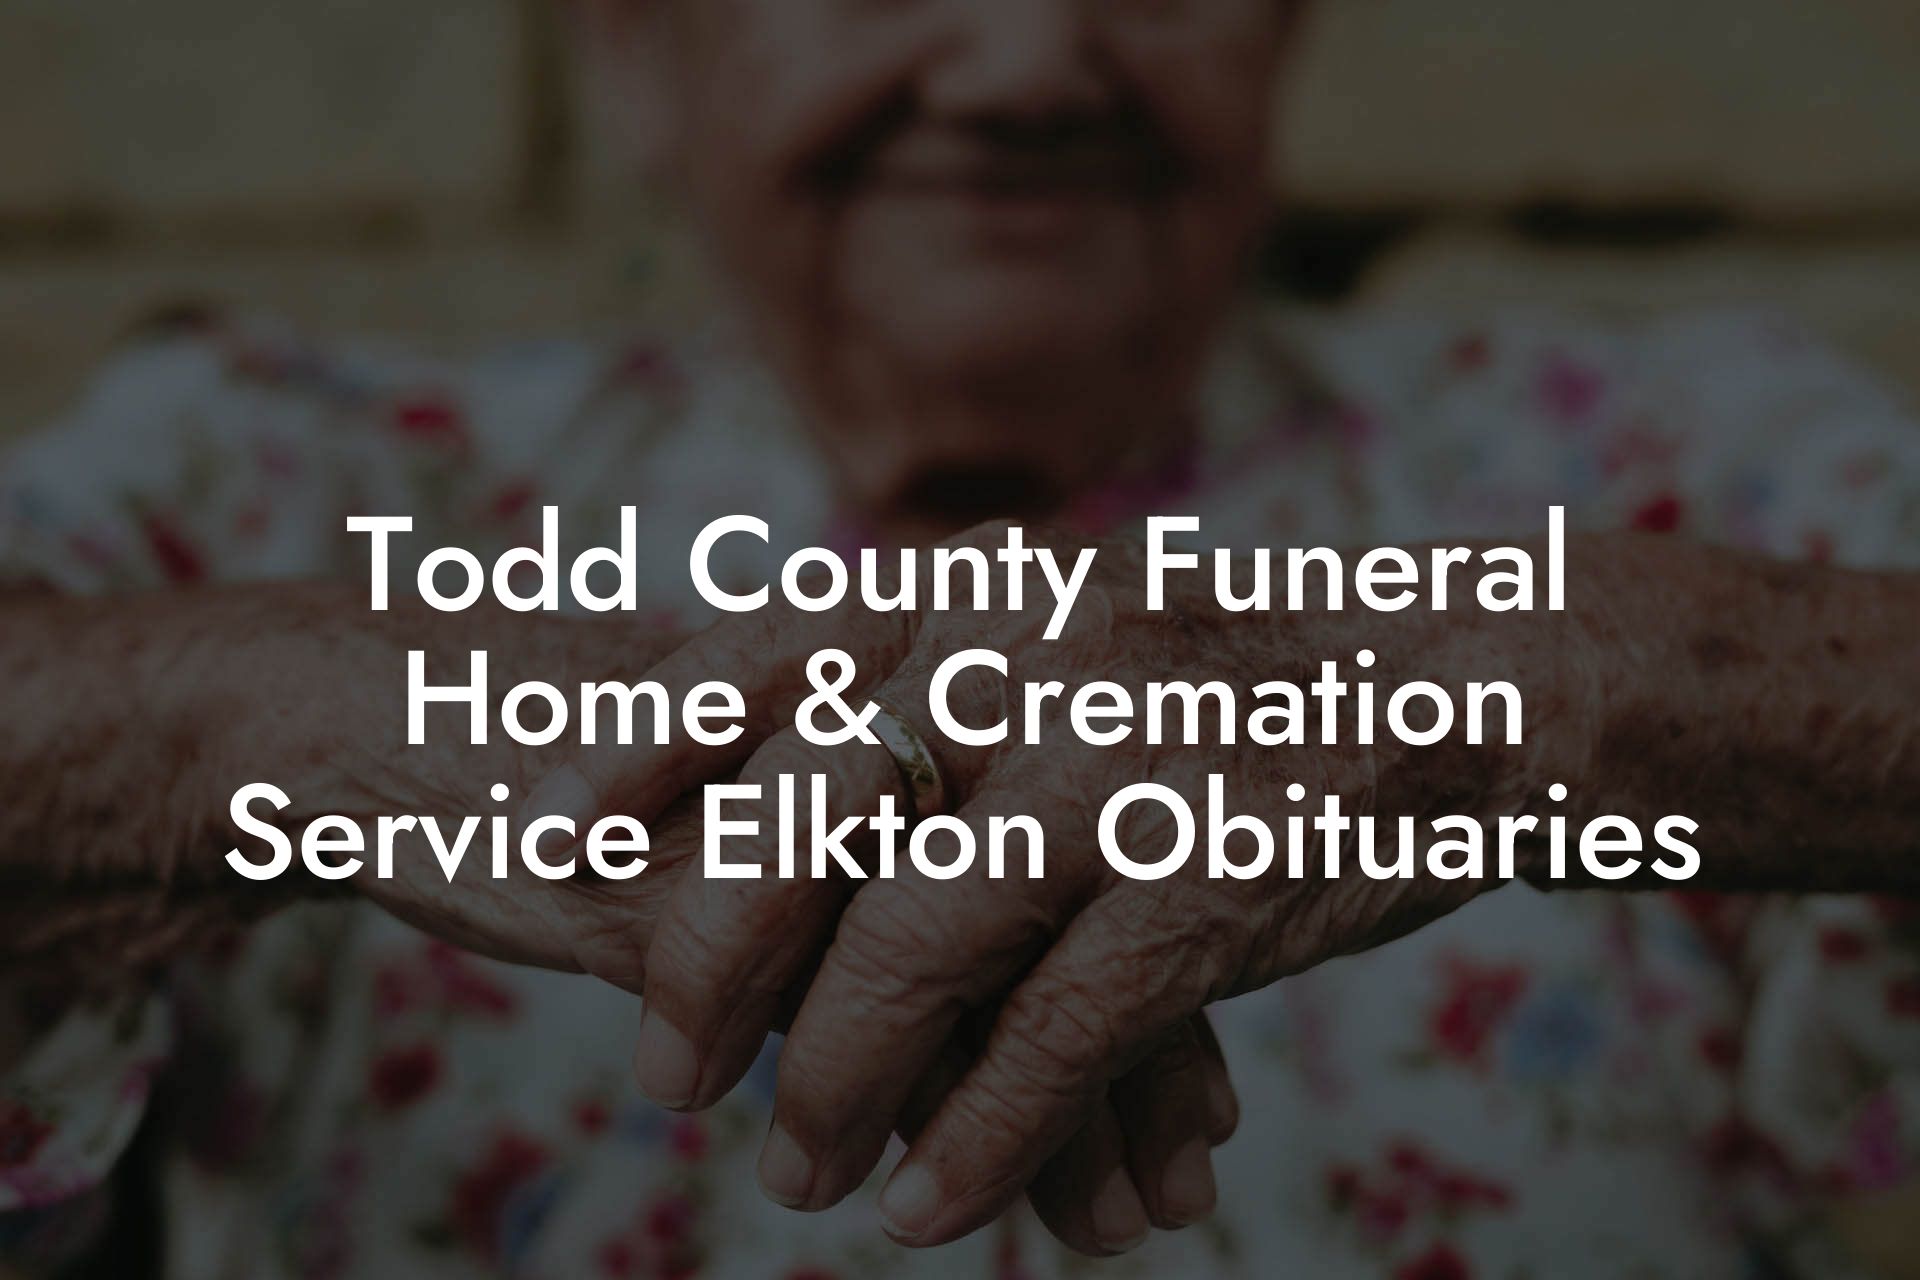 Todd County Funeral Home & Cremation Service Elkton Obituaries